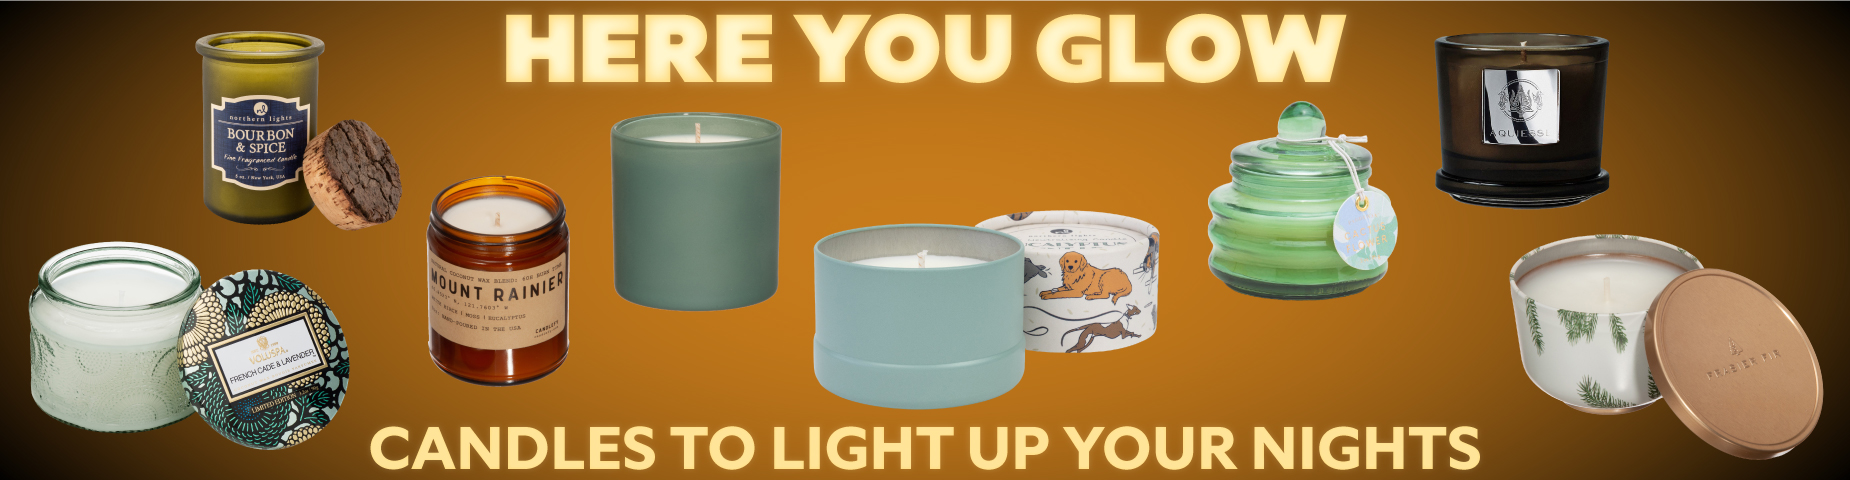 HERE YOU GLOW: Candles to light up your nights